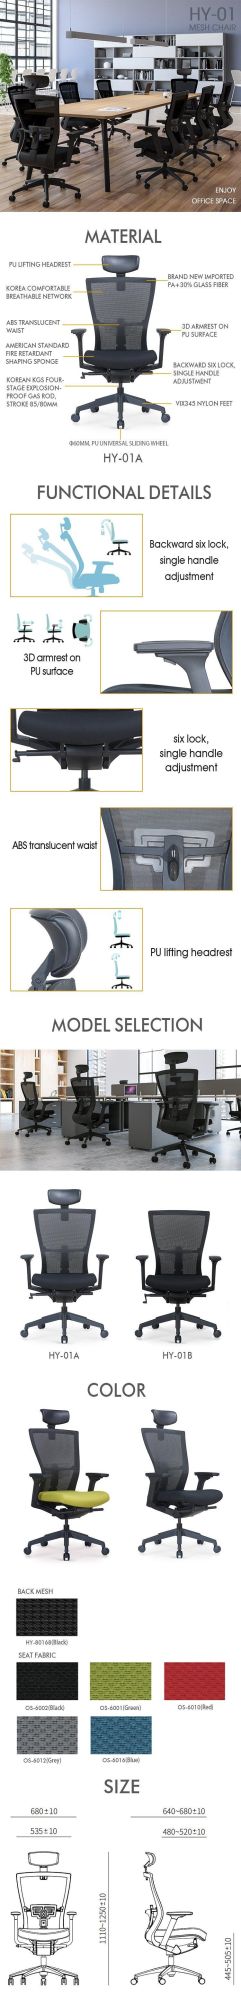 Data Entry Home Work All Types of Furniture Mesh Office Chair